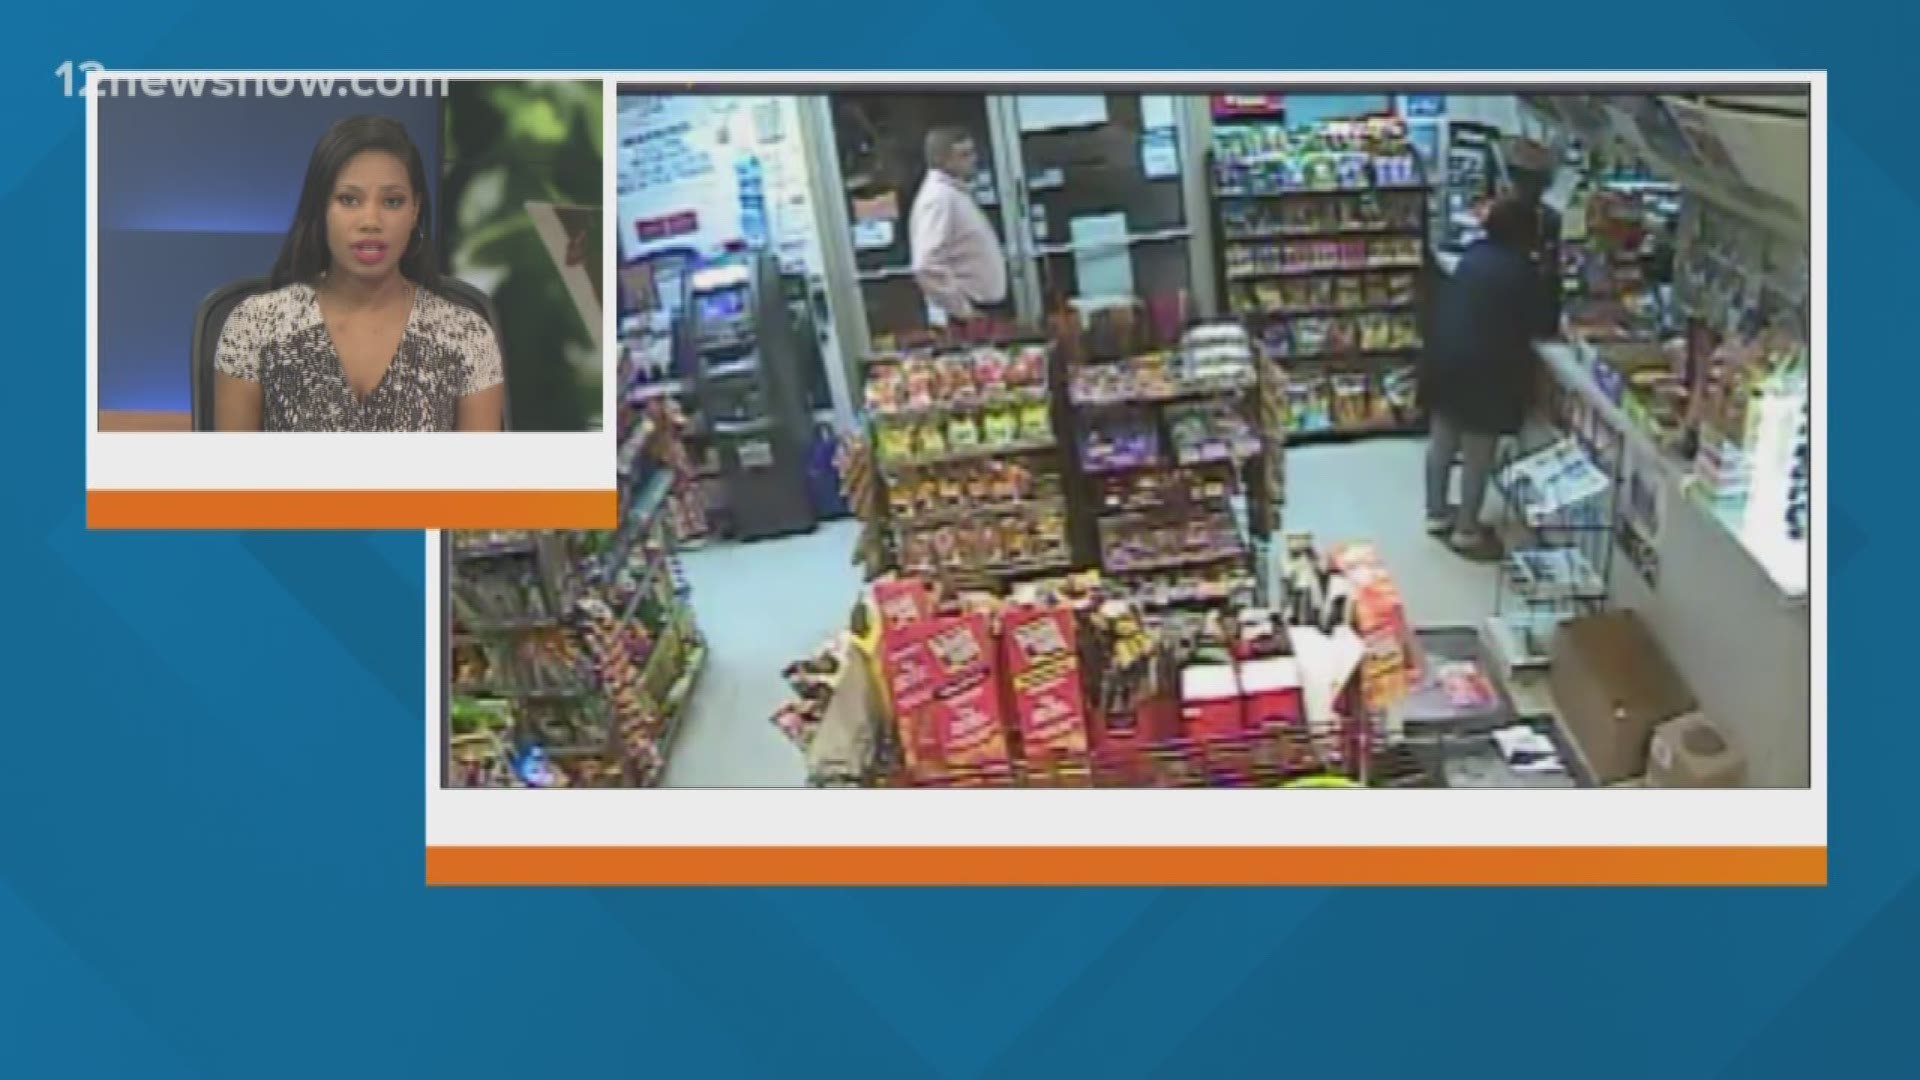 Port Arthur Police Department is searching for a man who swapped lottery tickets at a convenient store. If you have any information, Call 833-TIPS (8477).